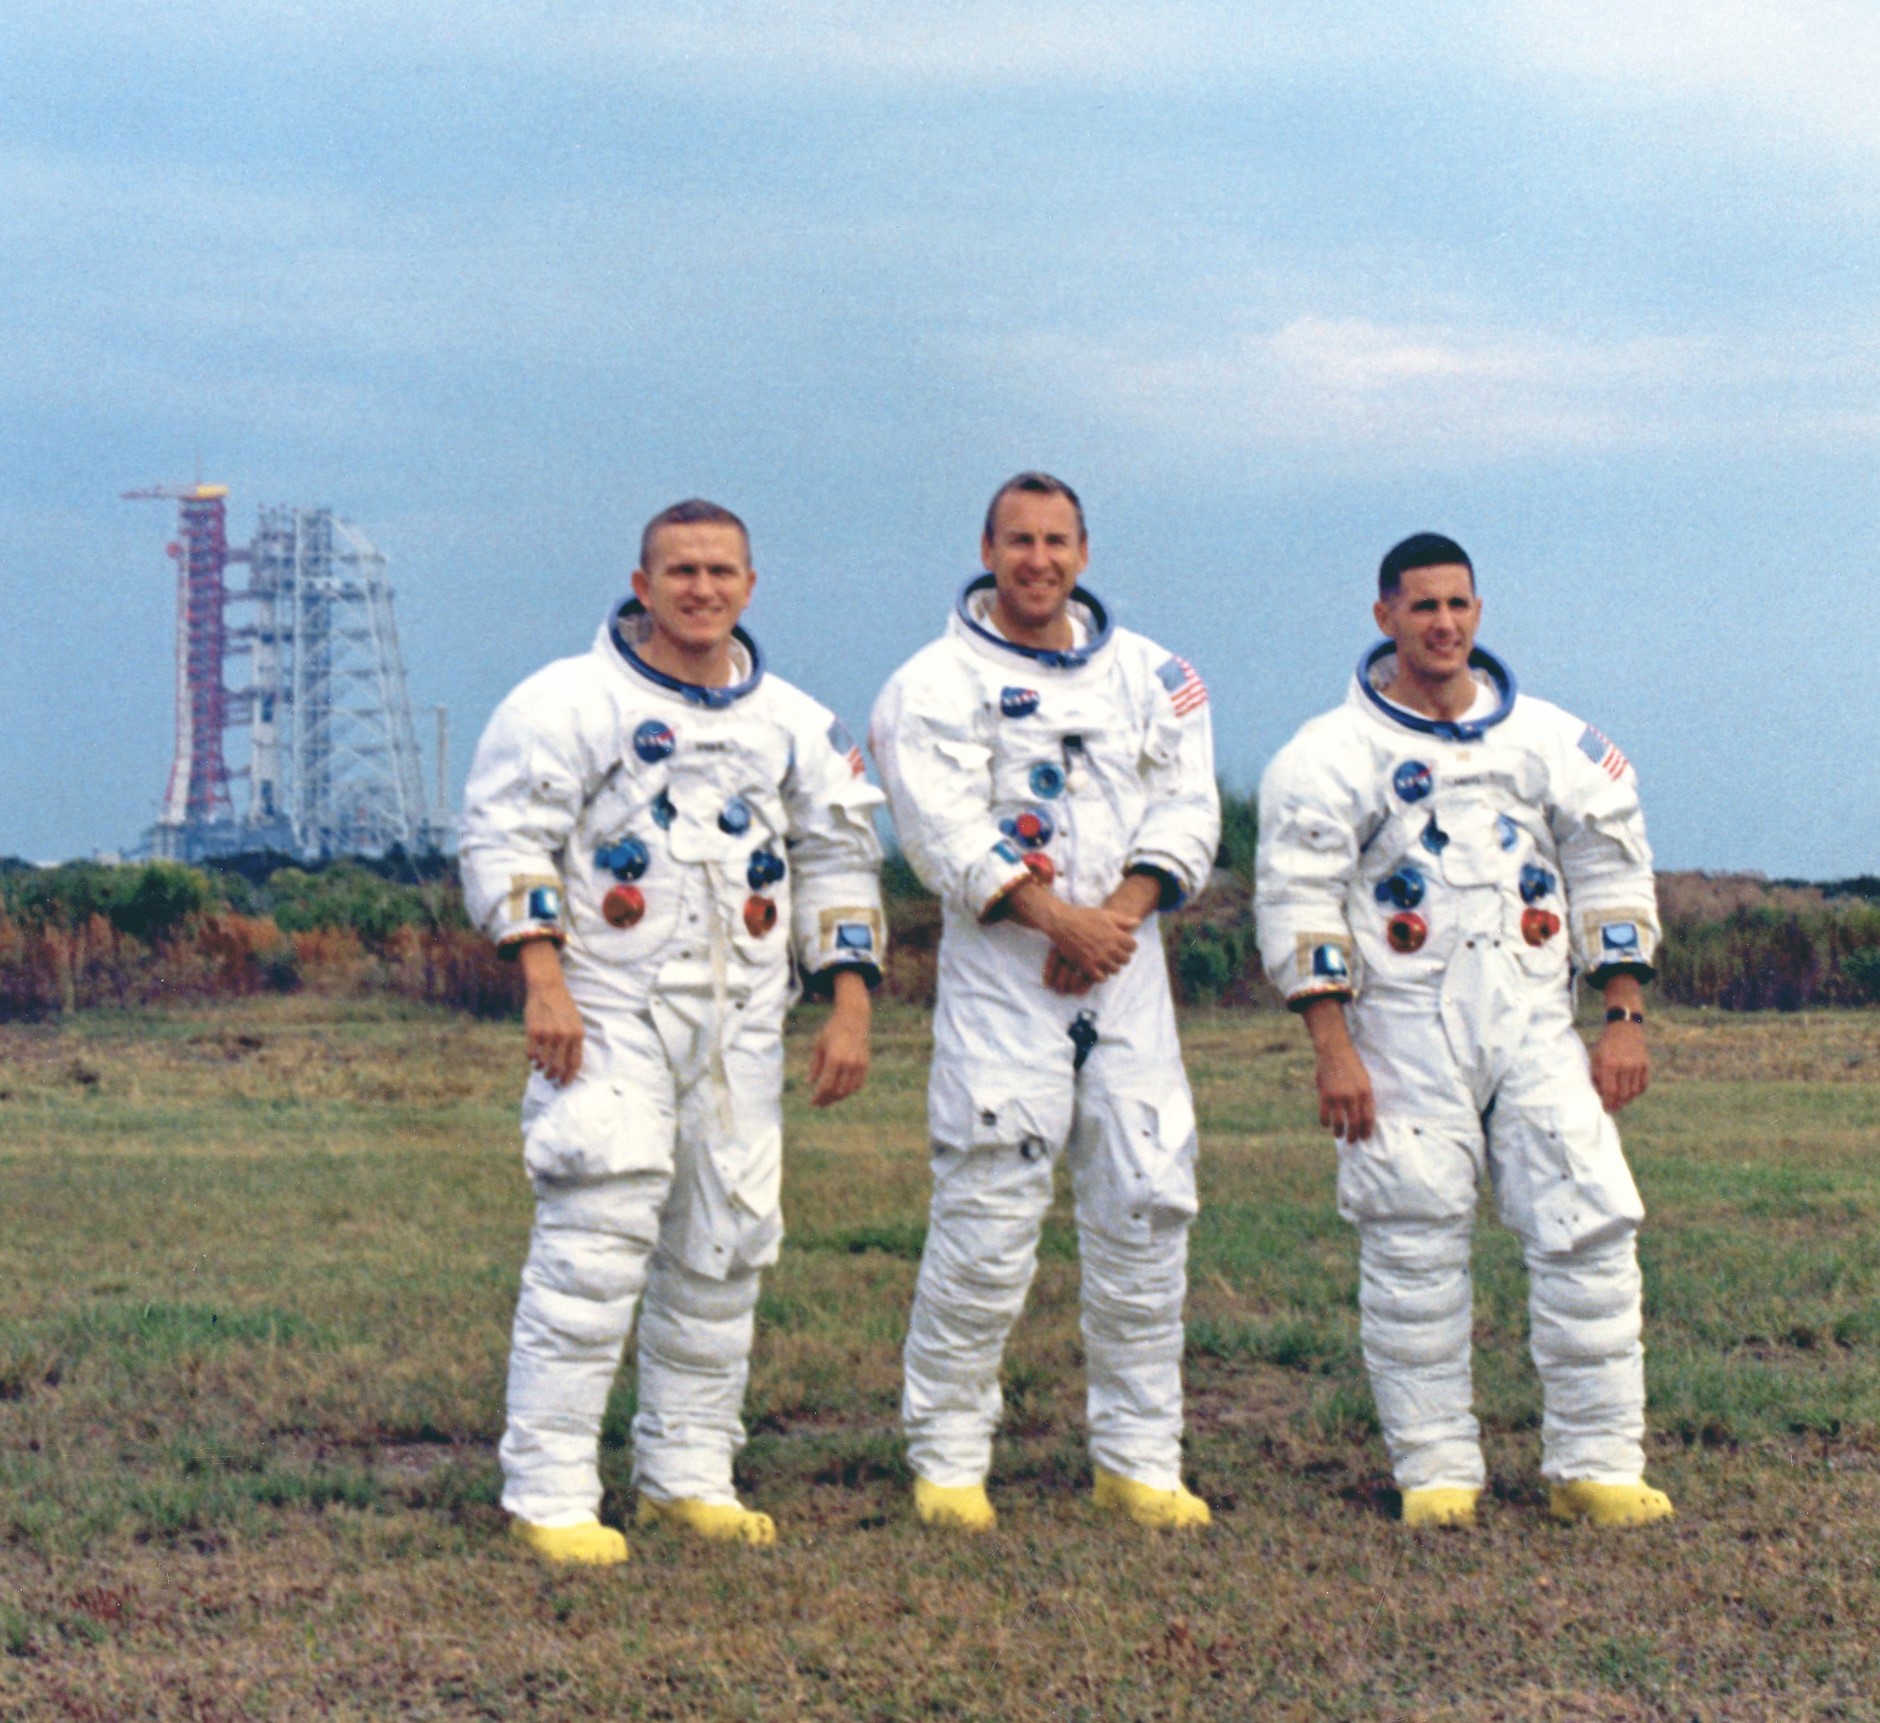 Borman, left, Lovell, and Anders pose with their Saturn V